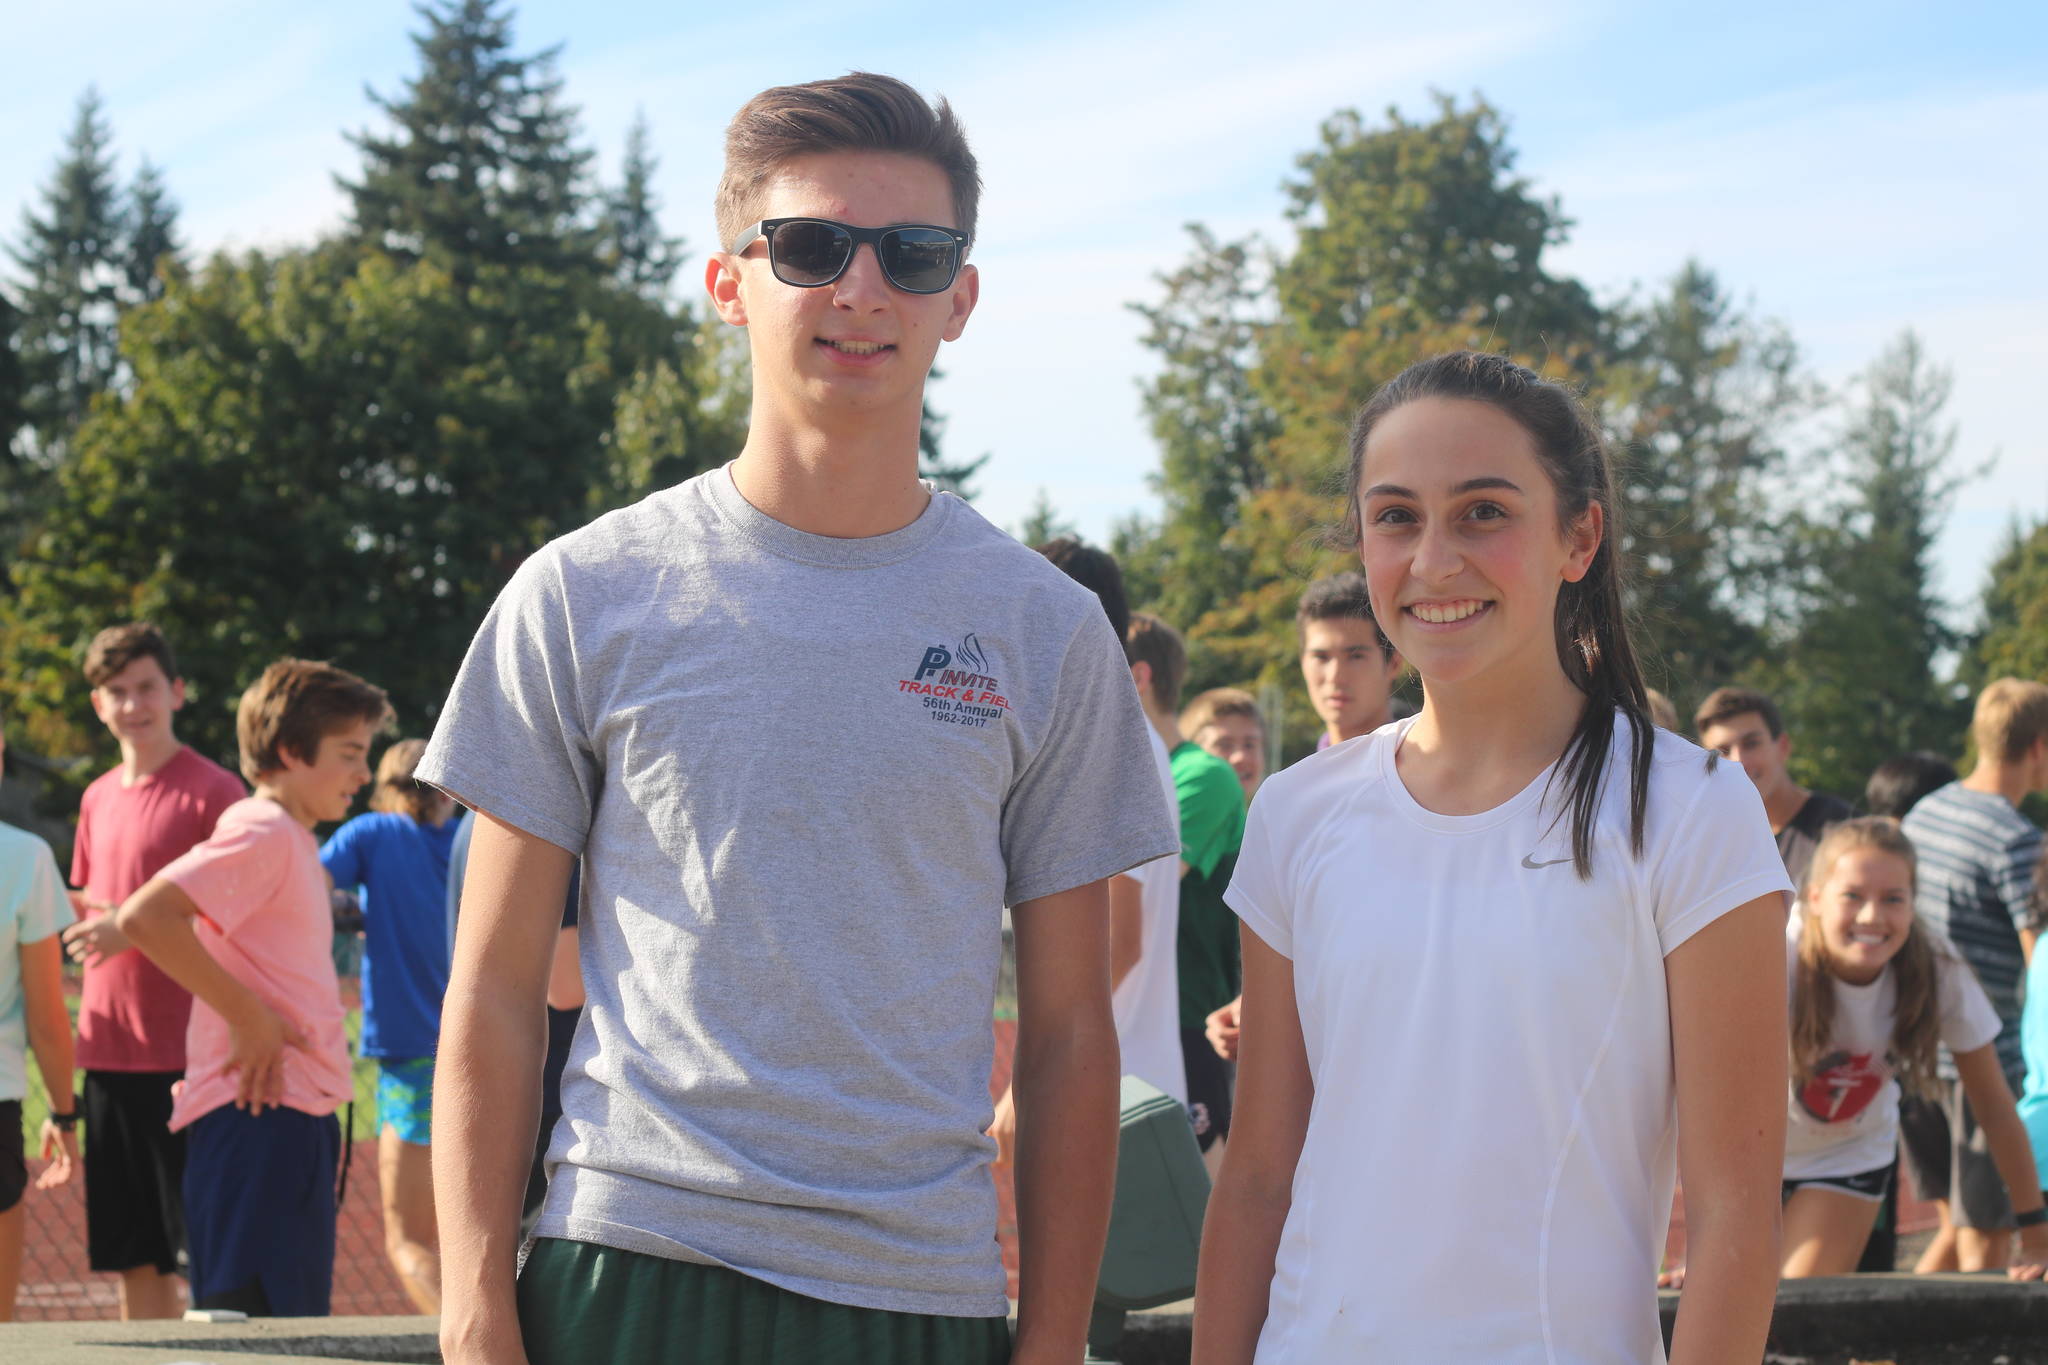 Redmond High’s George Cretu and Chloe Connolly are the Mustangs’ top runners this season. Andy Nystrom/Redmond Reporter